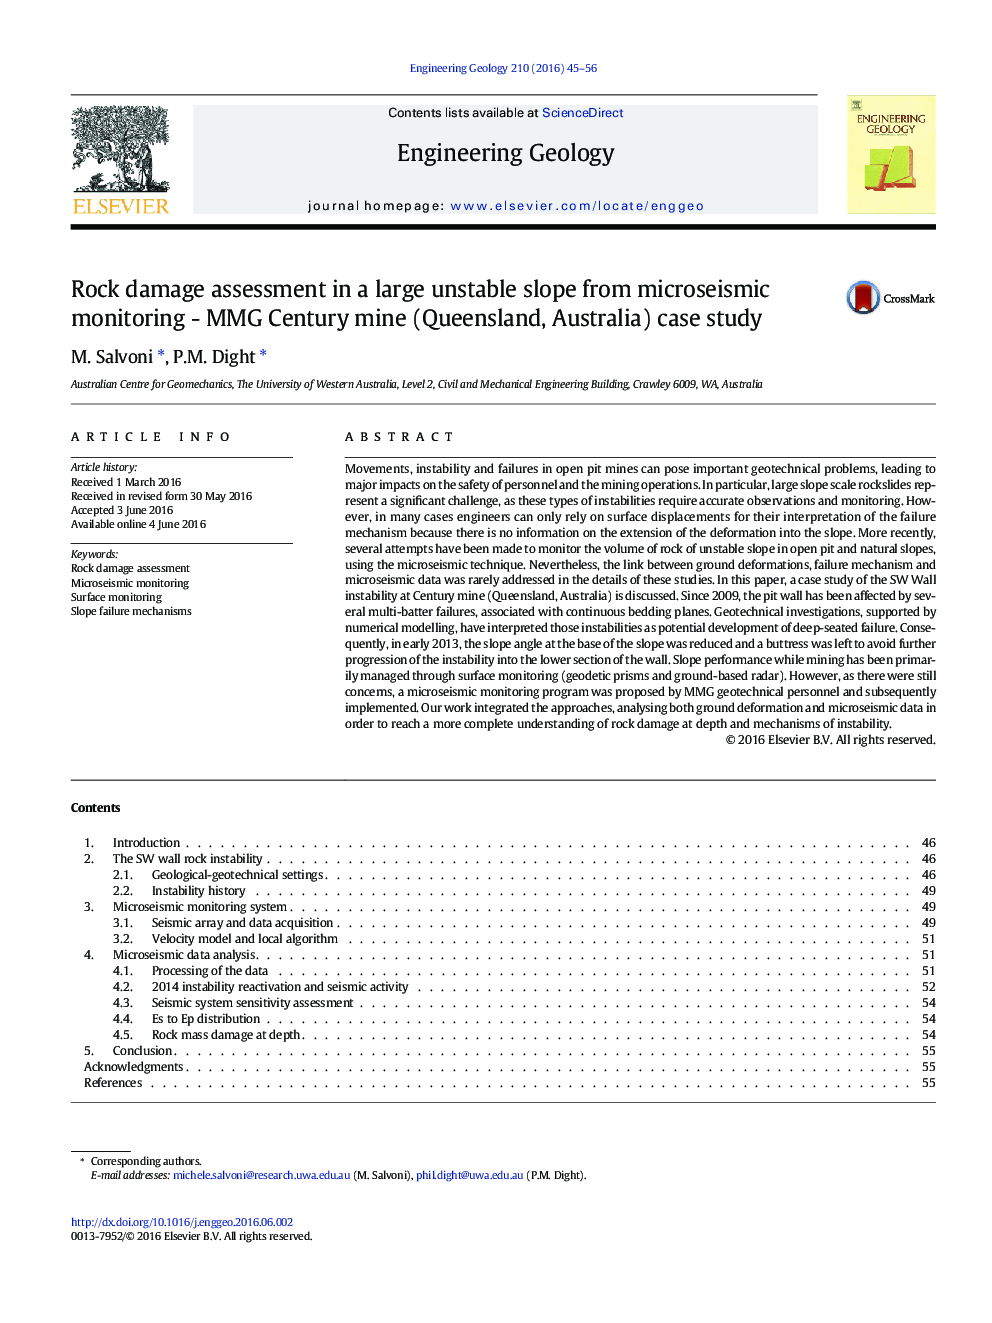 Rock damage assessment in a large unstable slope from microseismic monitoring - MMG Century mine (Queensland, Australia) case study